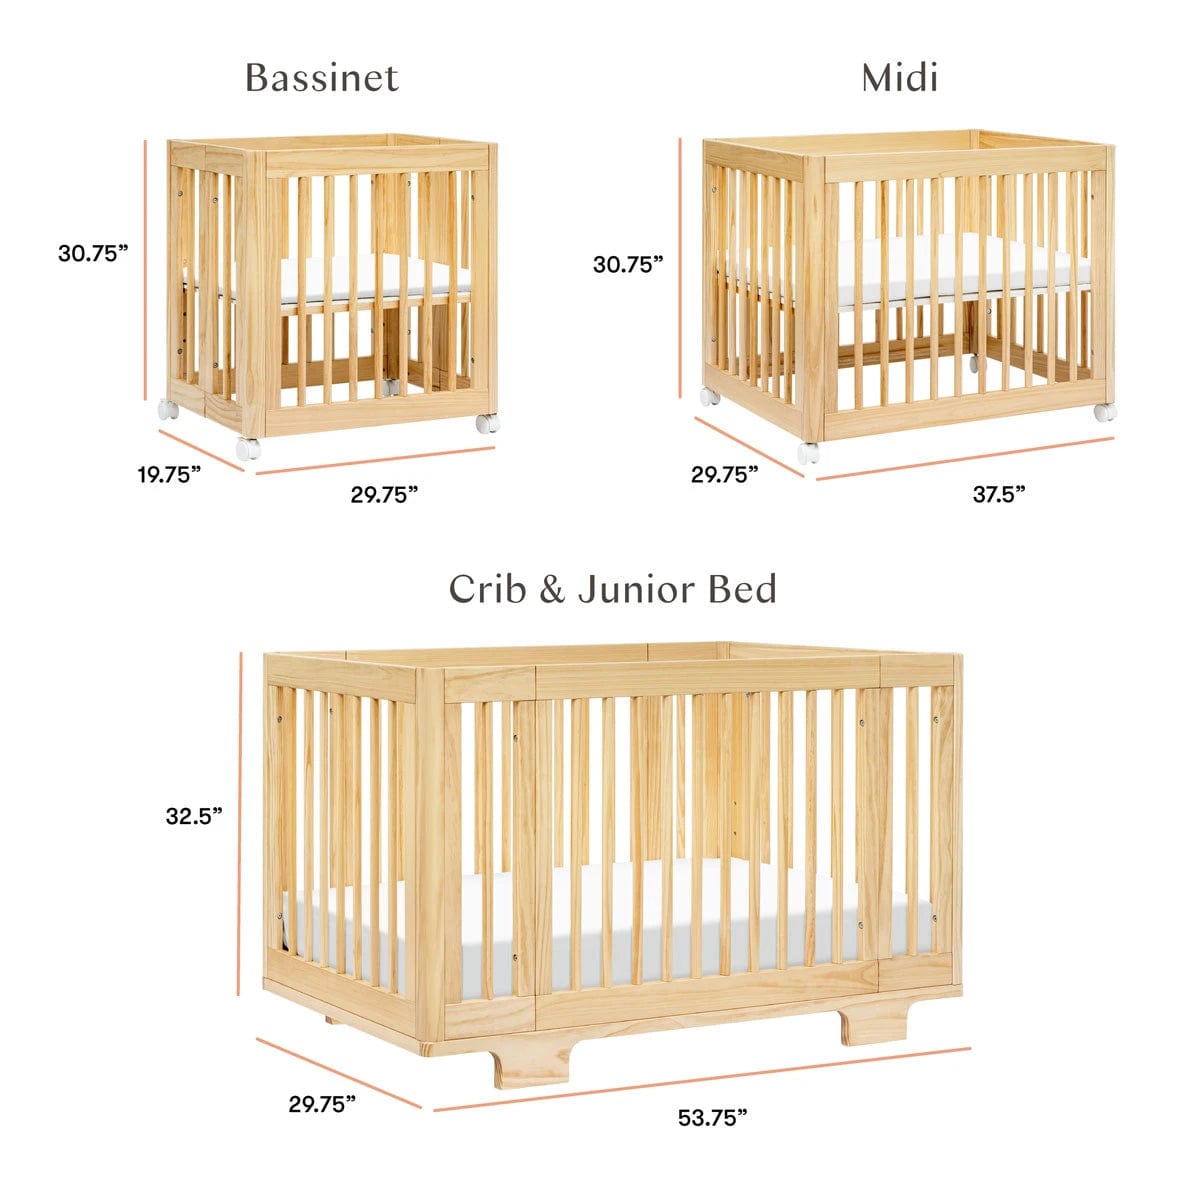 Babyletto crib Babyletto Yuzu 8-in-1 Convertible Crib with All-Stages Conversion Kits